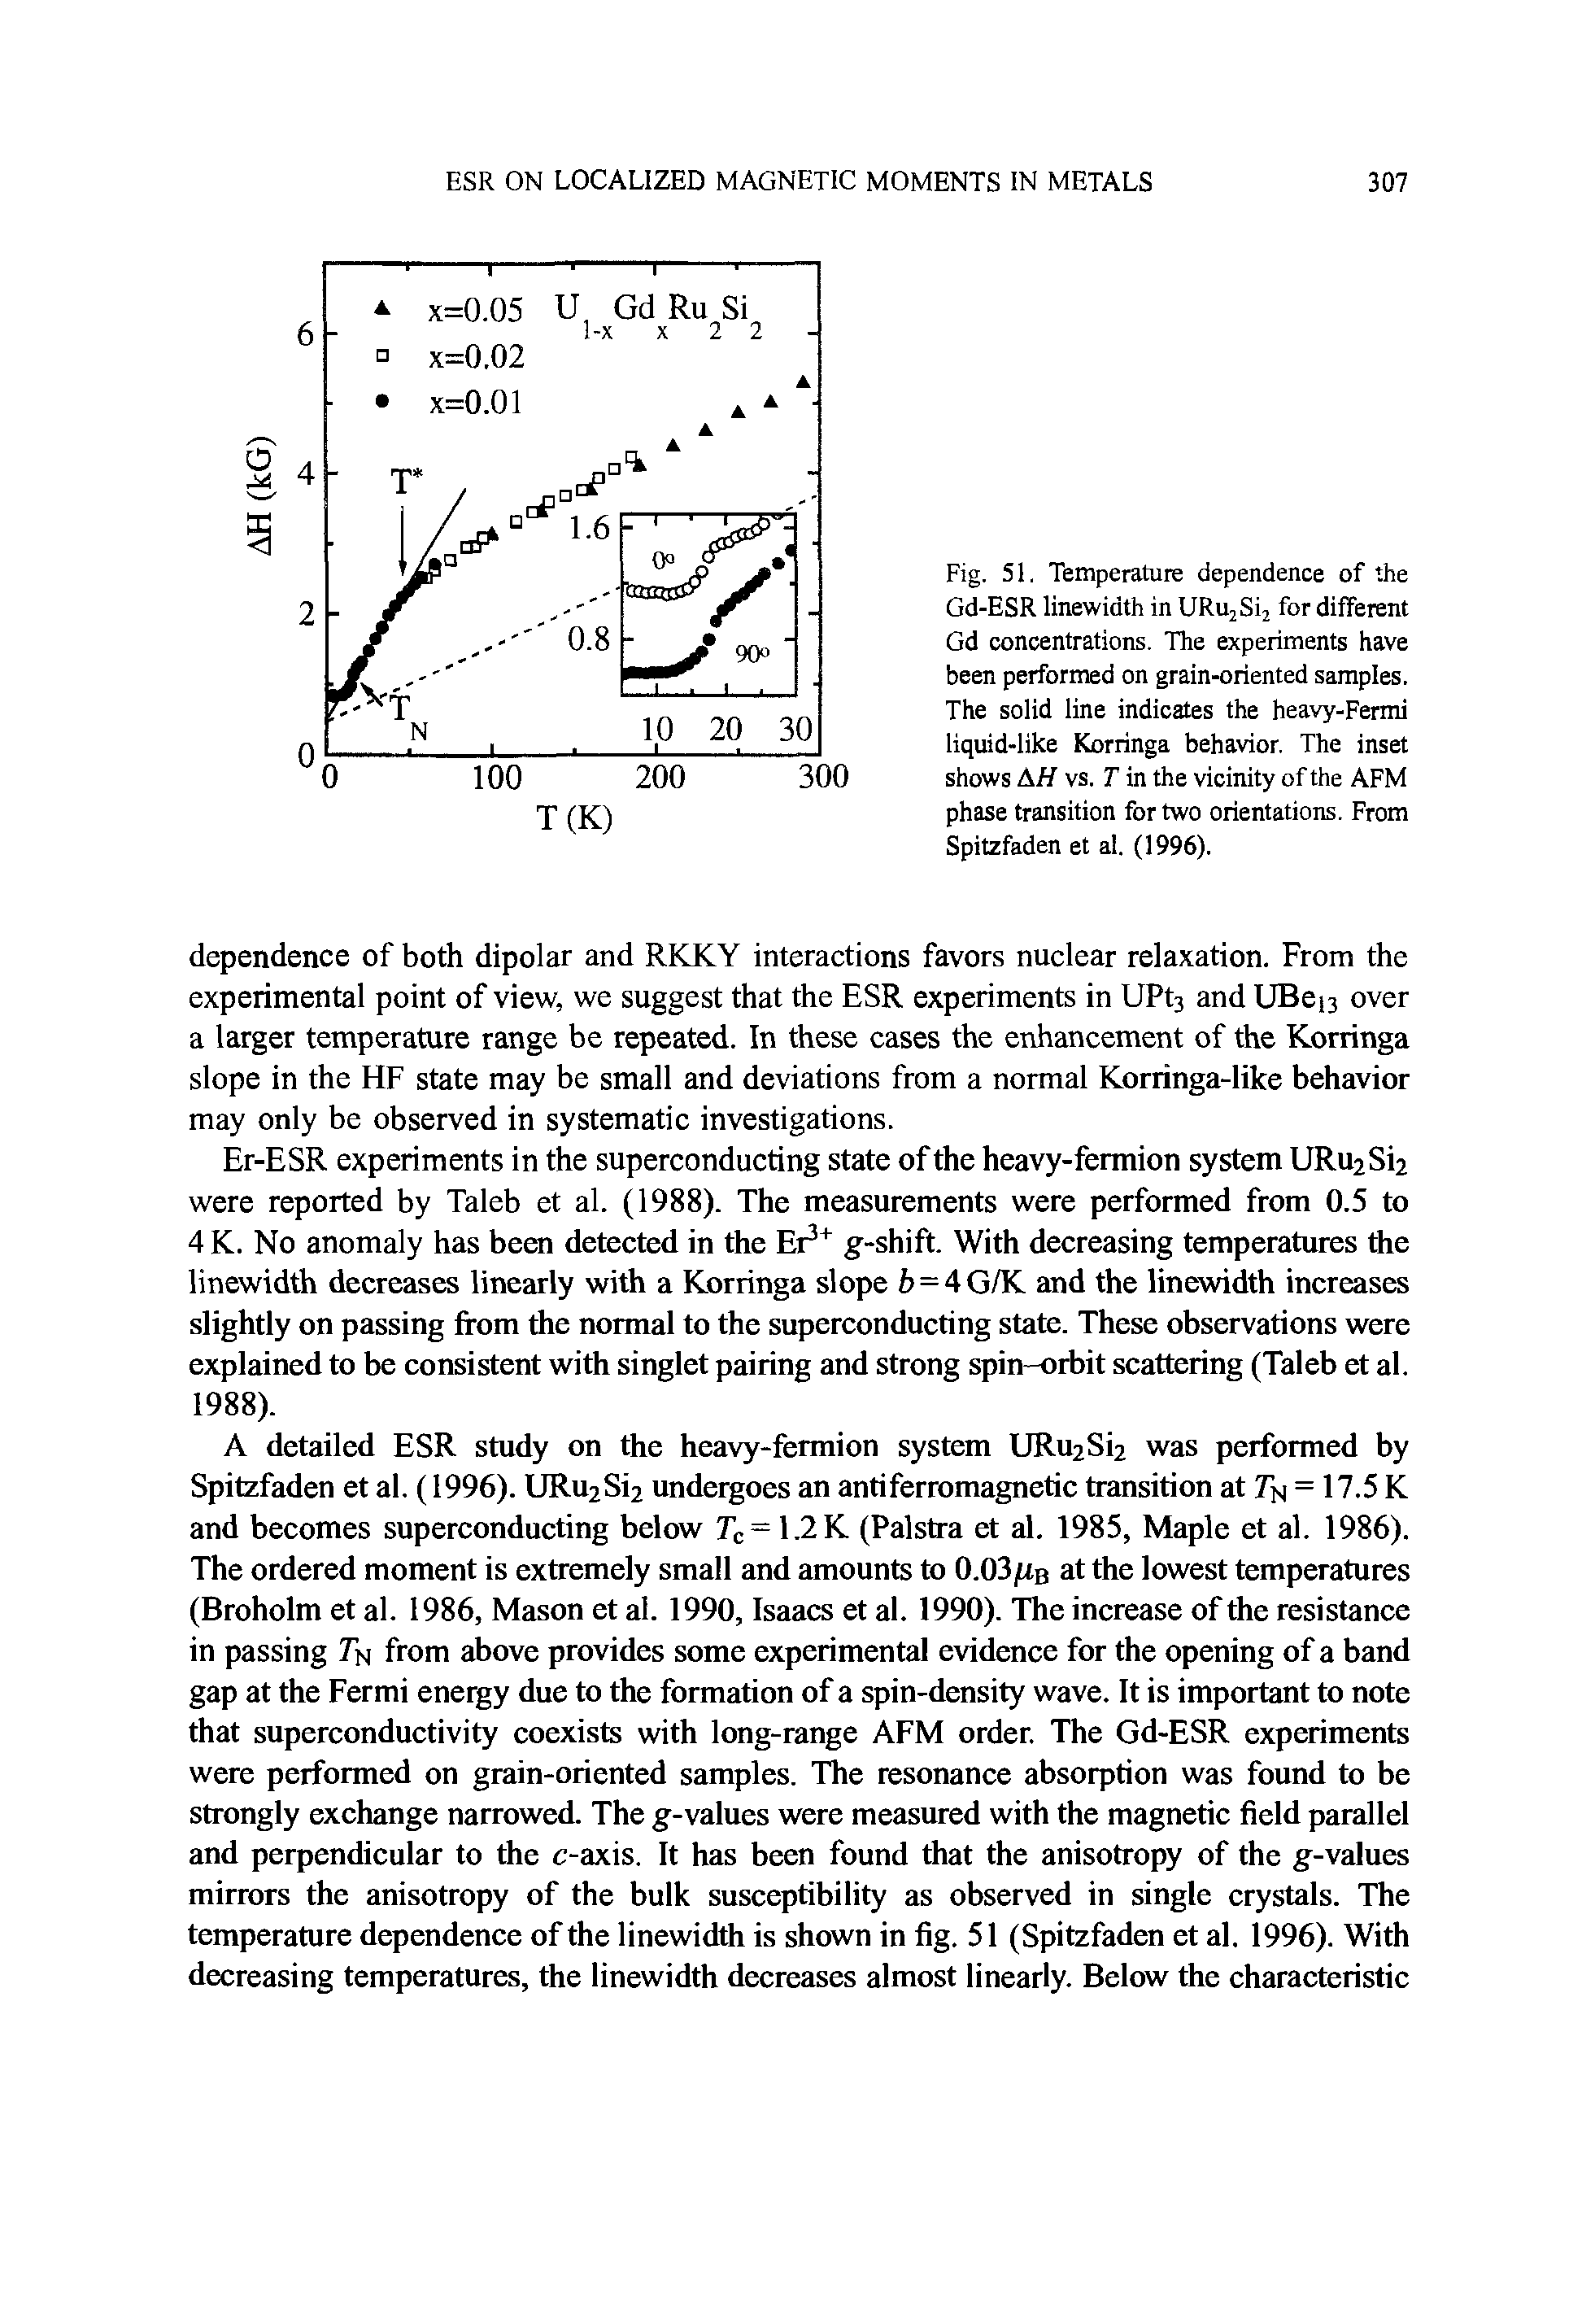 Fig. 51. Temperature dependence of the Gd-ESR linewidth in URu Sij for different Gd concentrations. The experiments have been performed on grain-oriented samples. The solid line indicates the heavy-Fermi liquid-like Korringa behavior. The inset shows A// vs. r in the vicinity of the AFM phase transition for two orientations. From Spitzfaden et al. (1996).